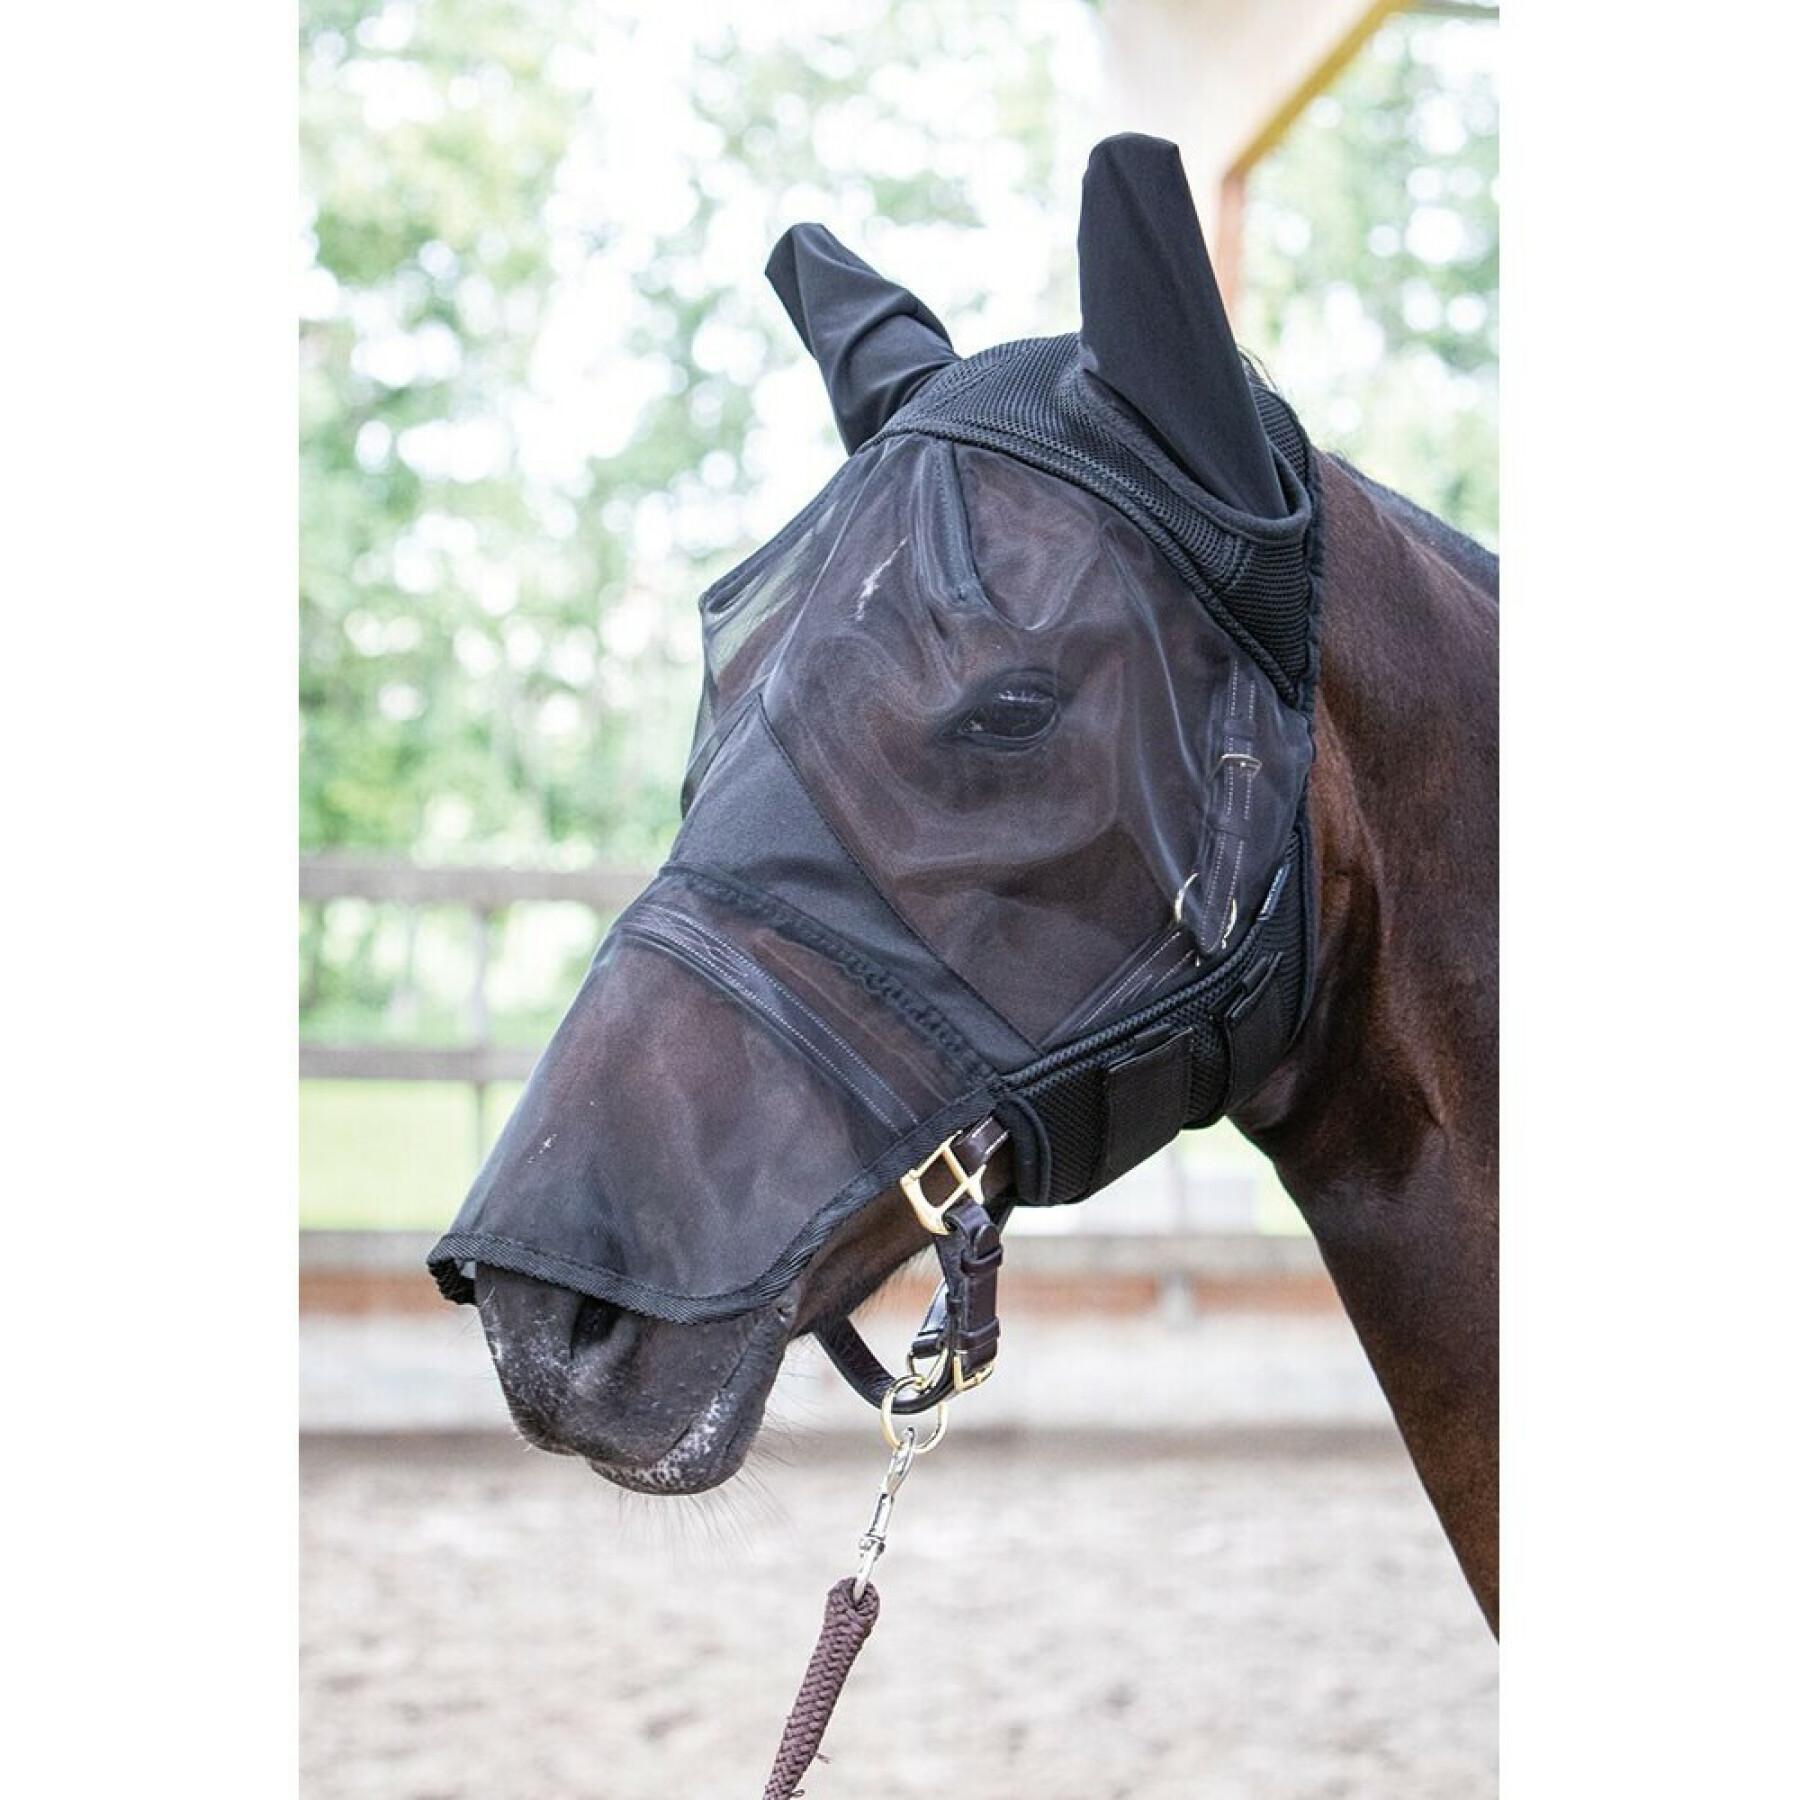 Masque anti-mouches pour cheval avec embout nasal Harry's Horse Flyshield